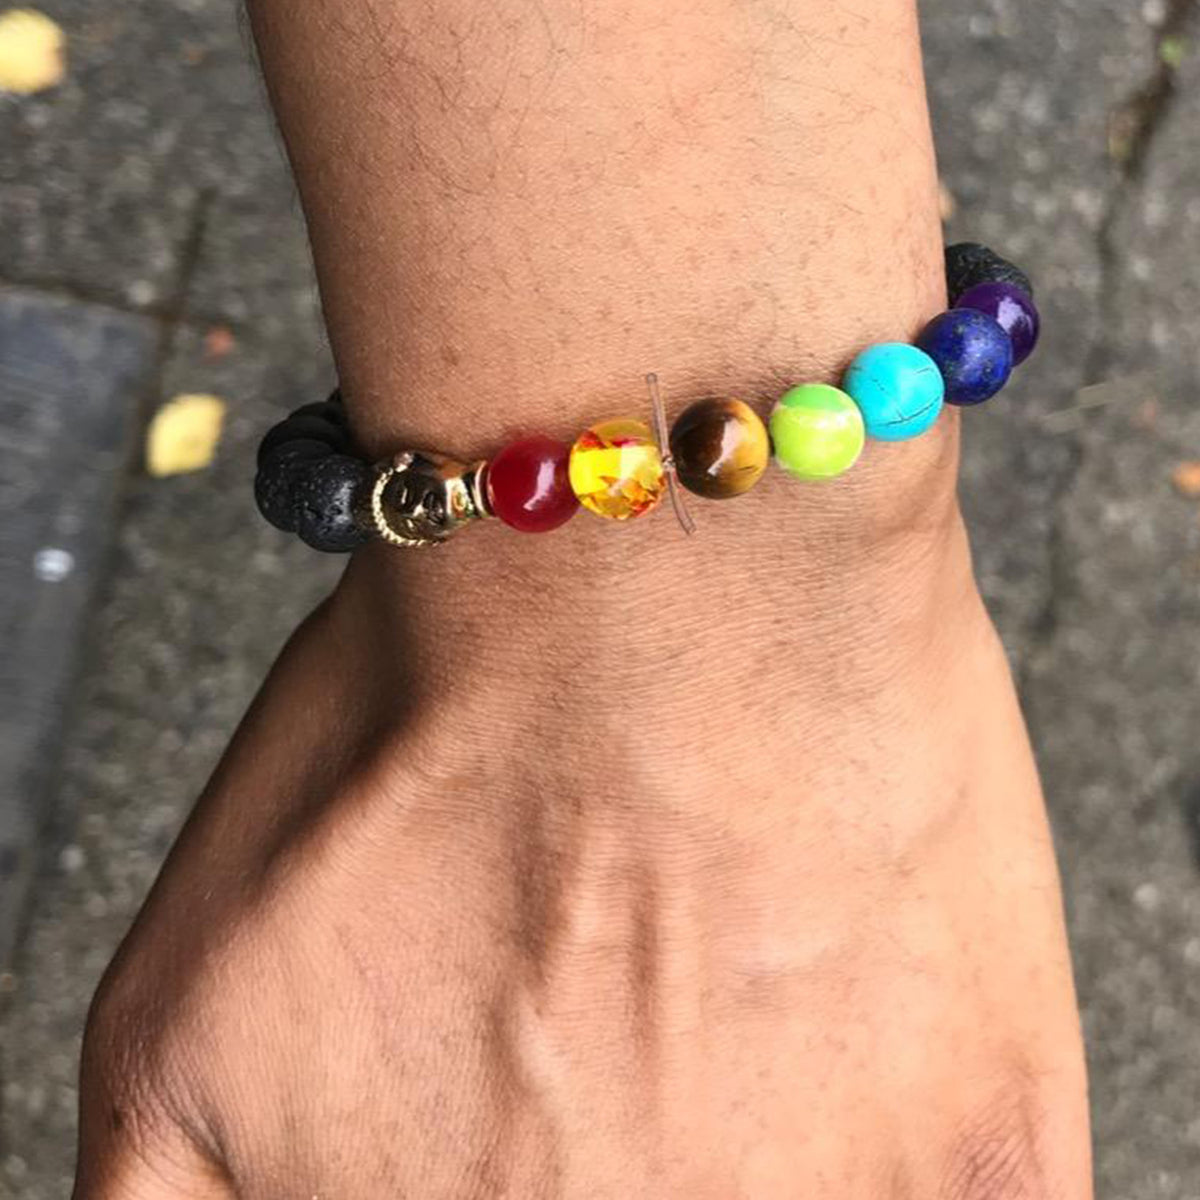 Bracelet with 7 Chakra Stones with Lava stone Diffuser Beads